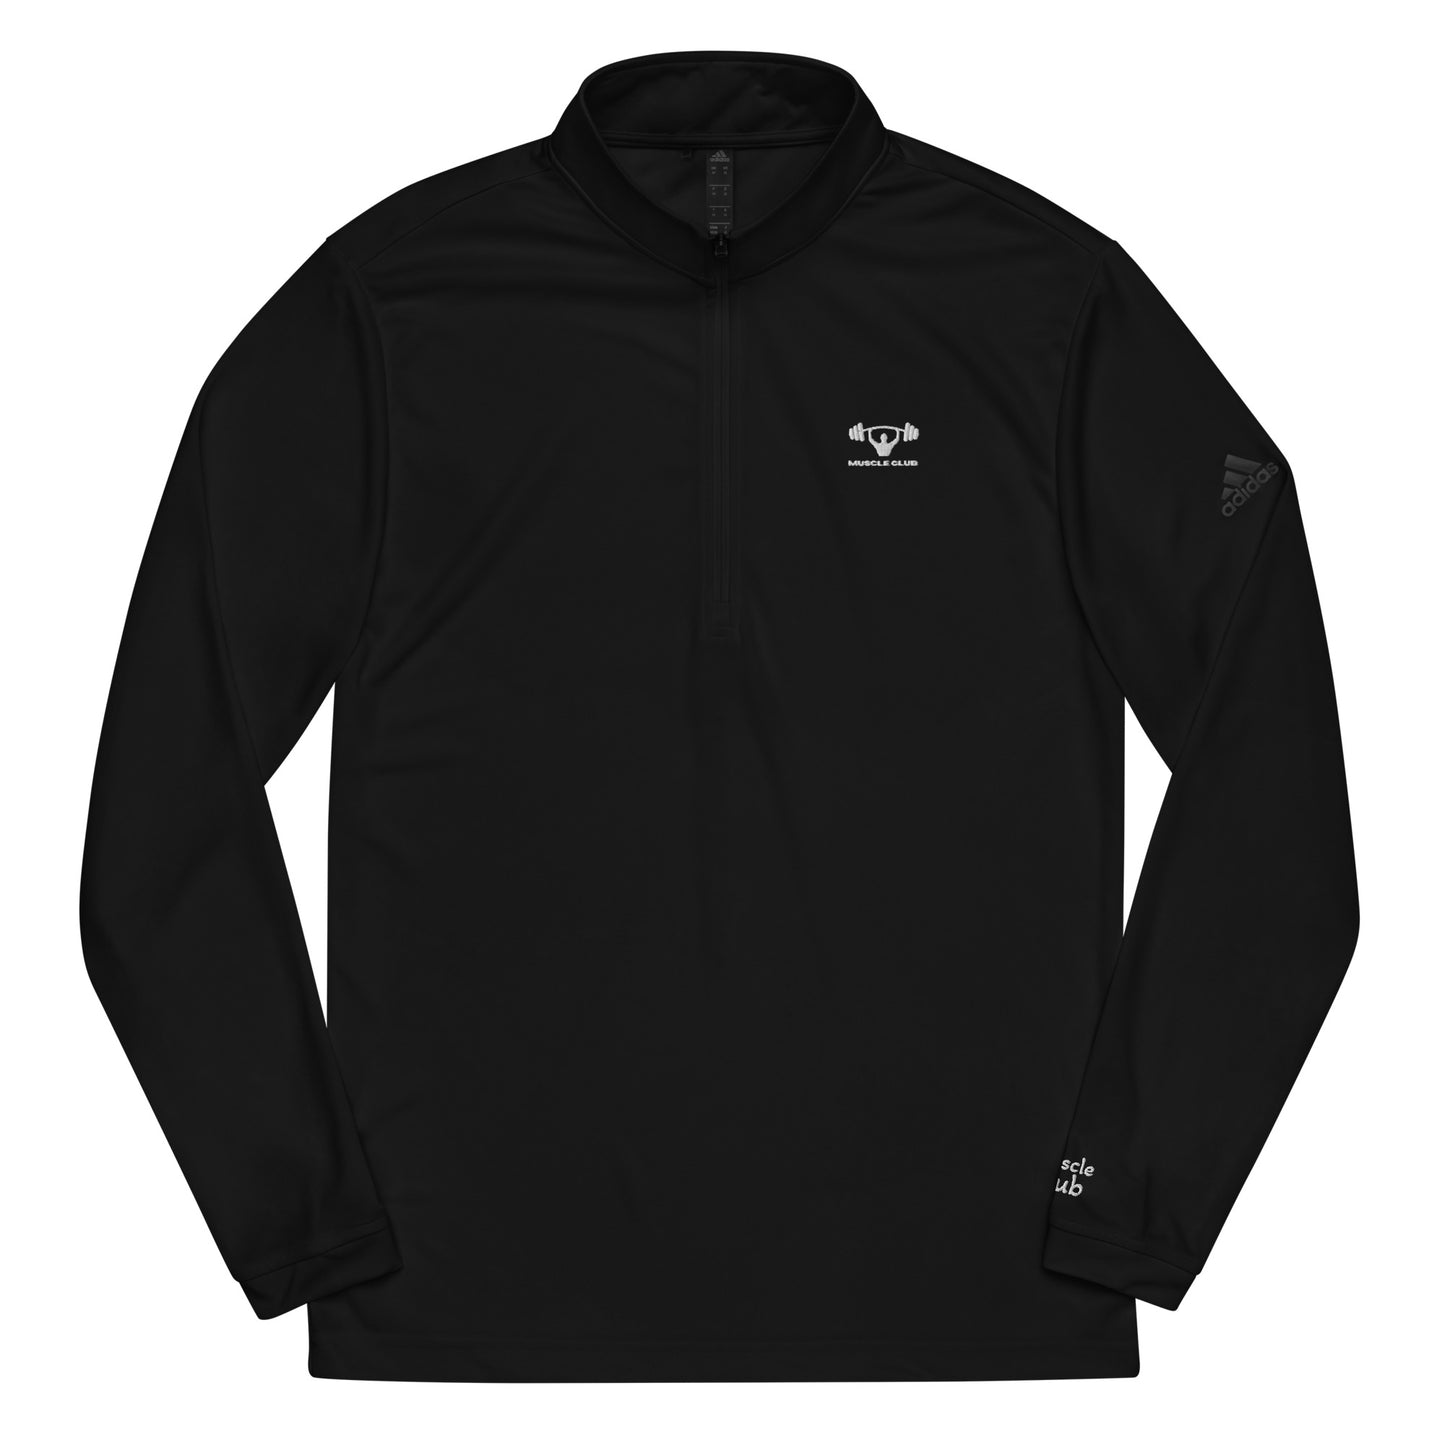 muscle clubzip pullover